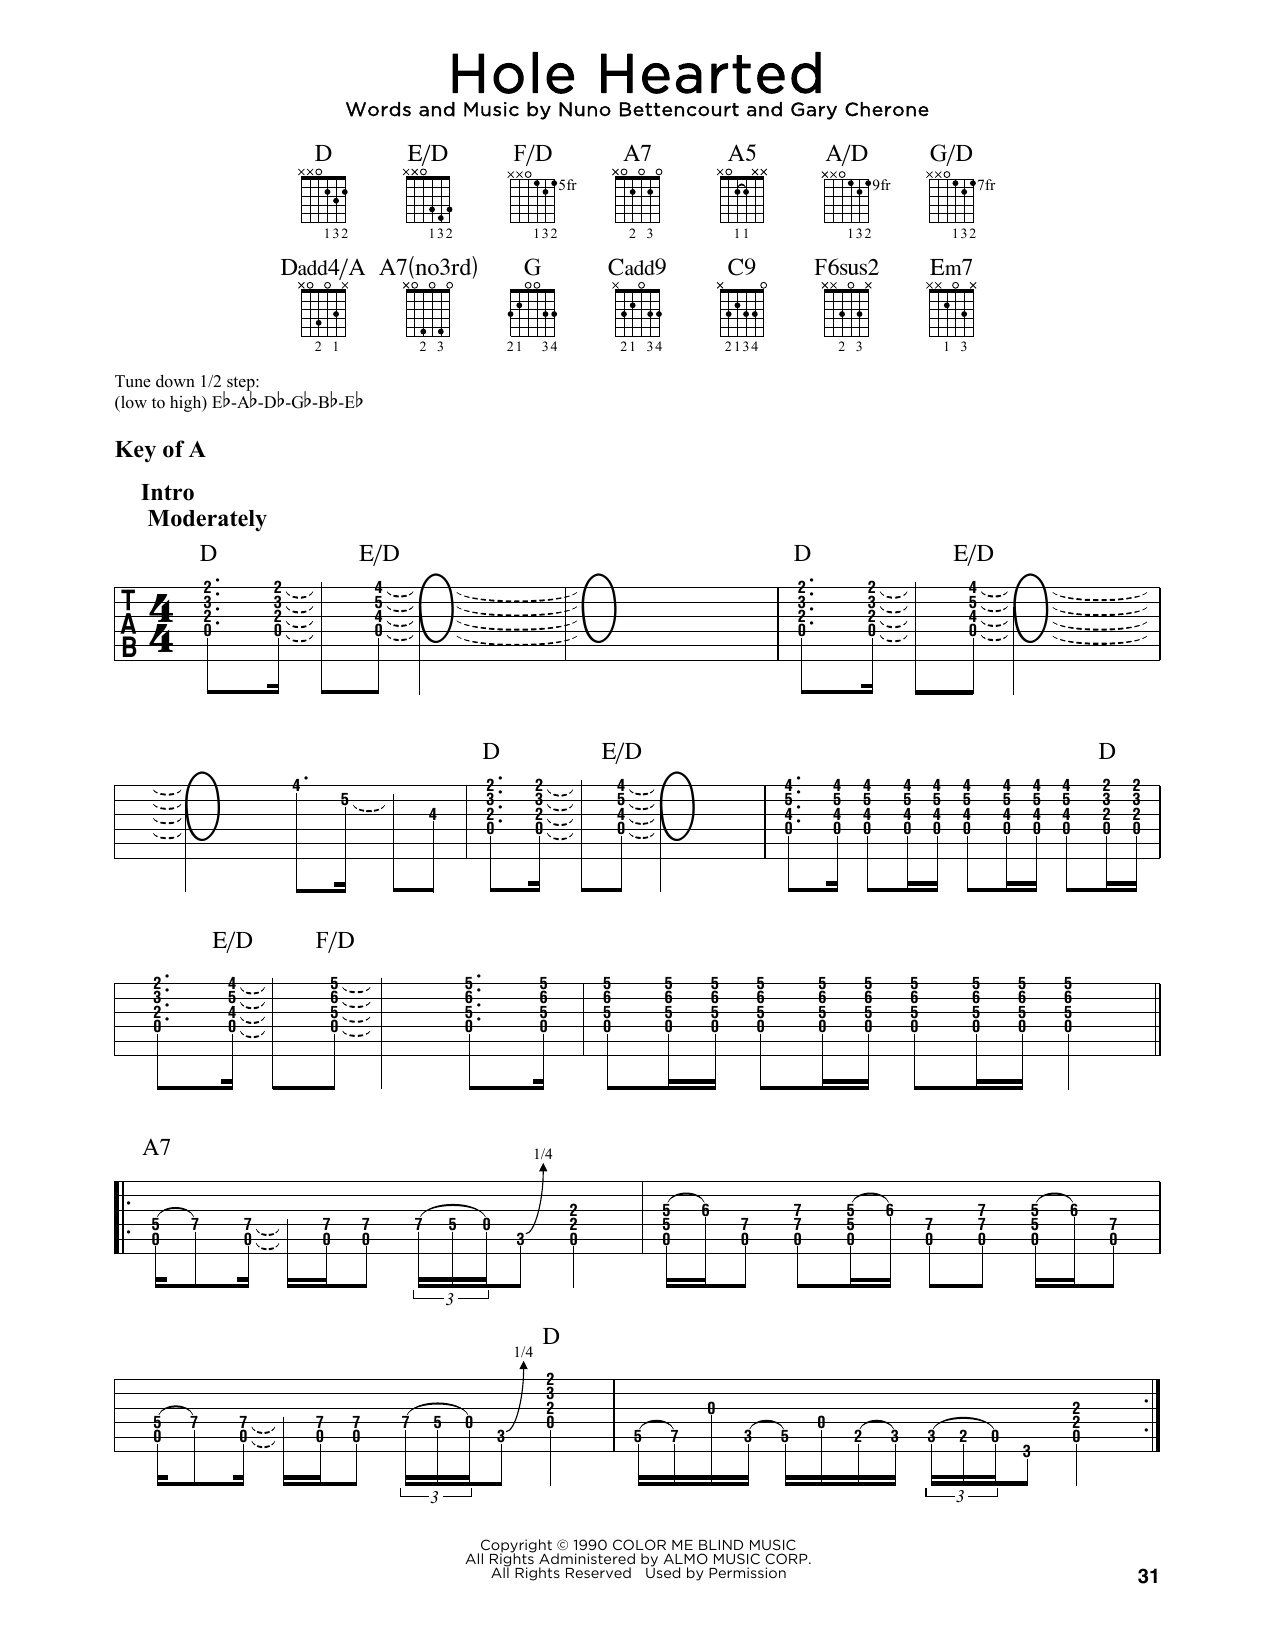 Download Extreme Hole Hearted Sheet Music